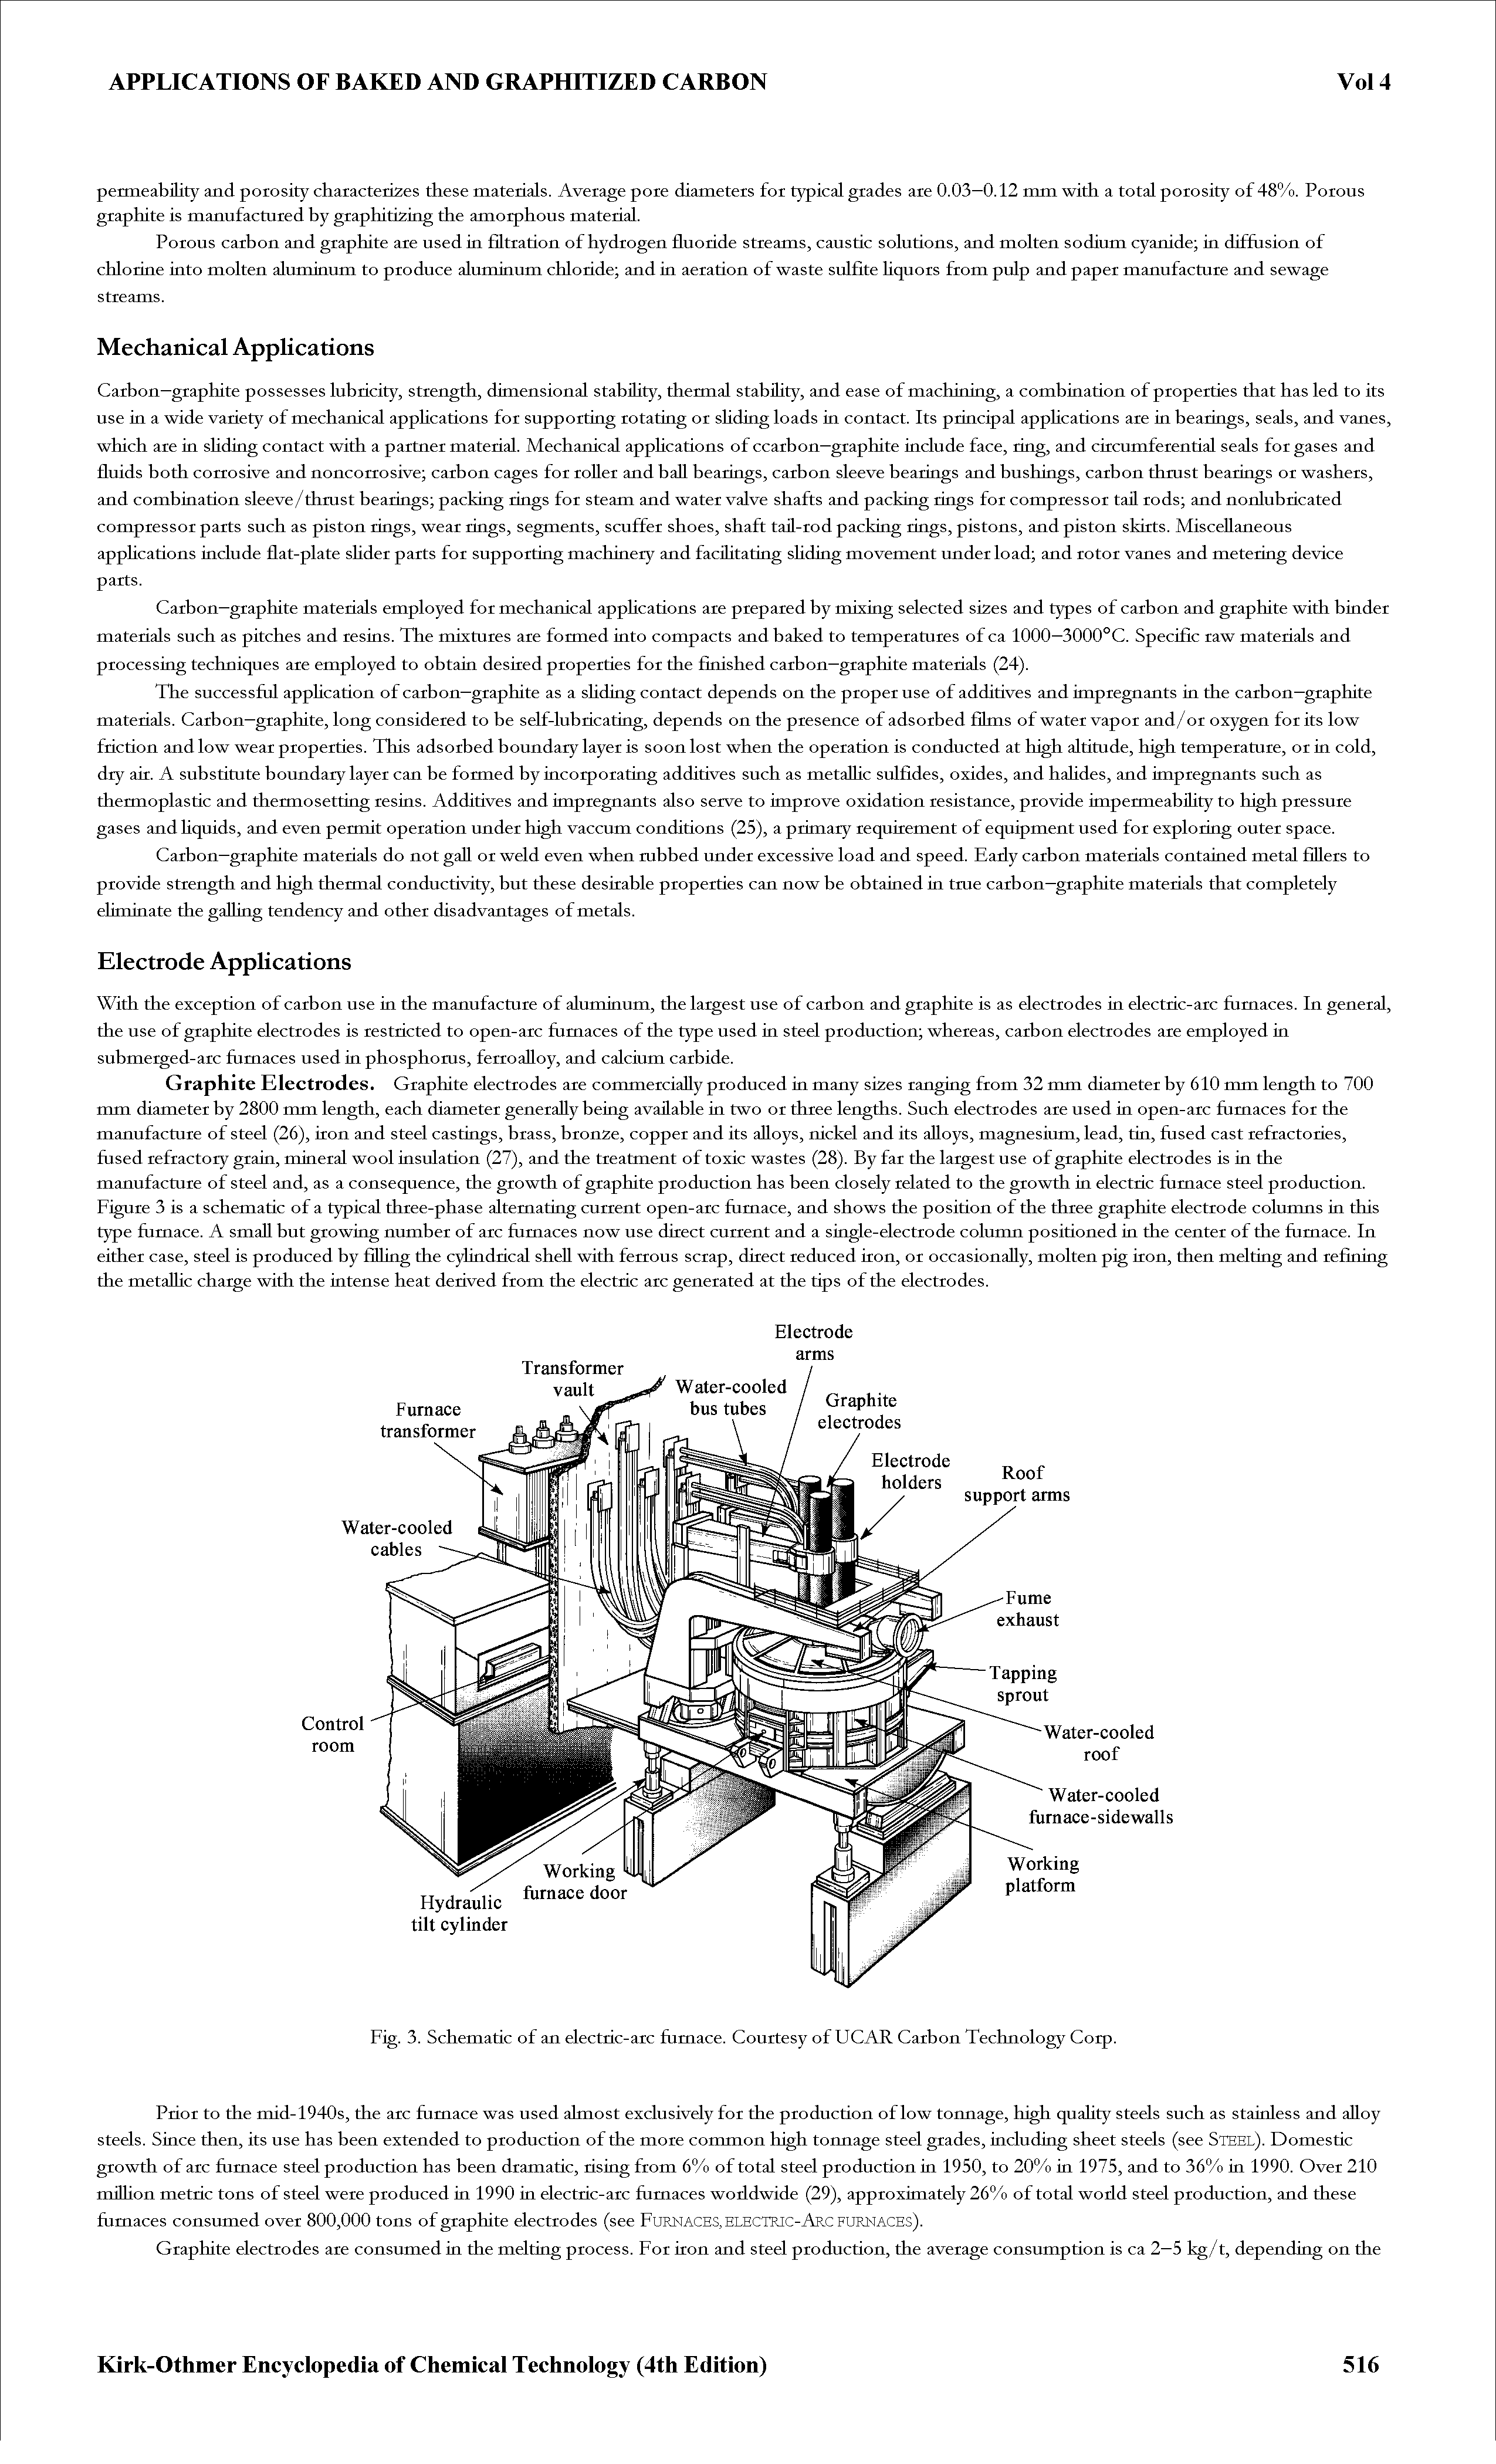 Fig. 3. Schematic of an electric-arc furnace. Courtesy of UCAR Carbon Technology Corp.